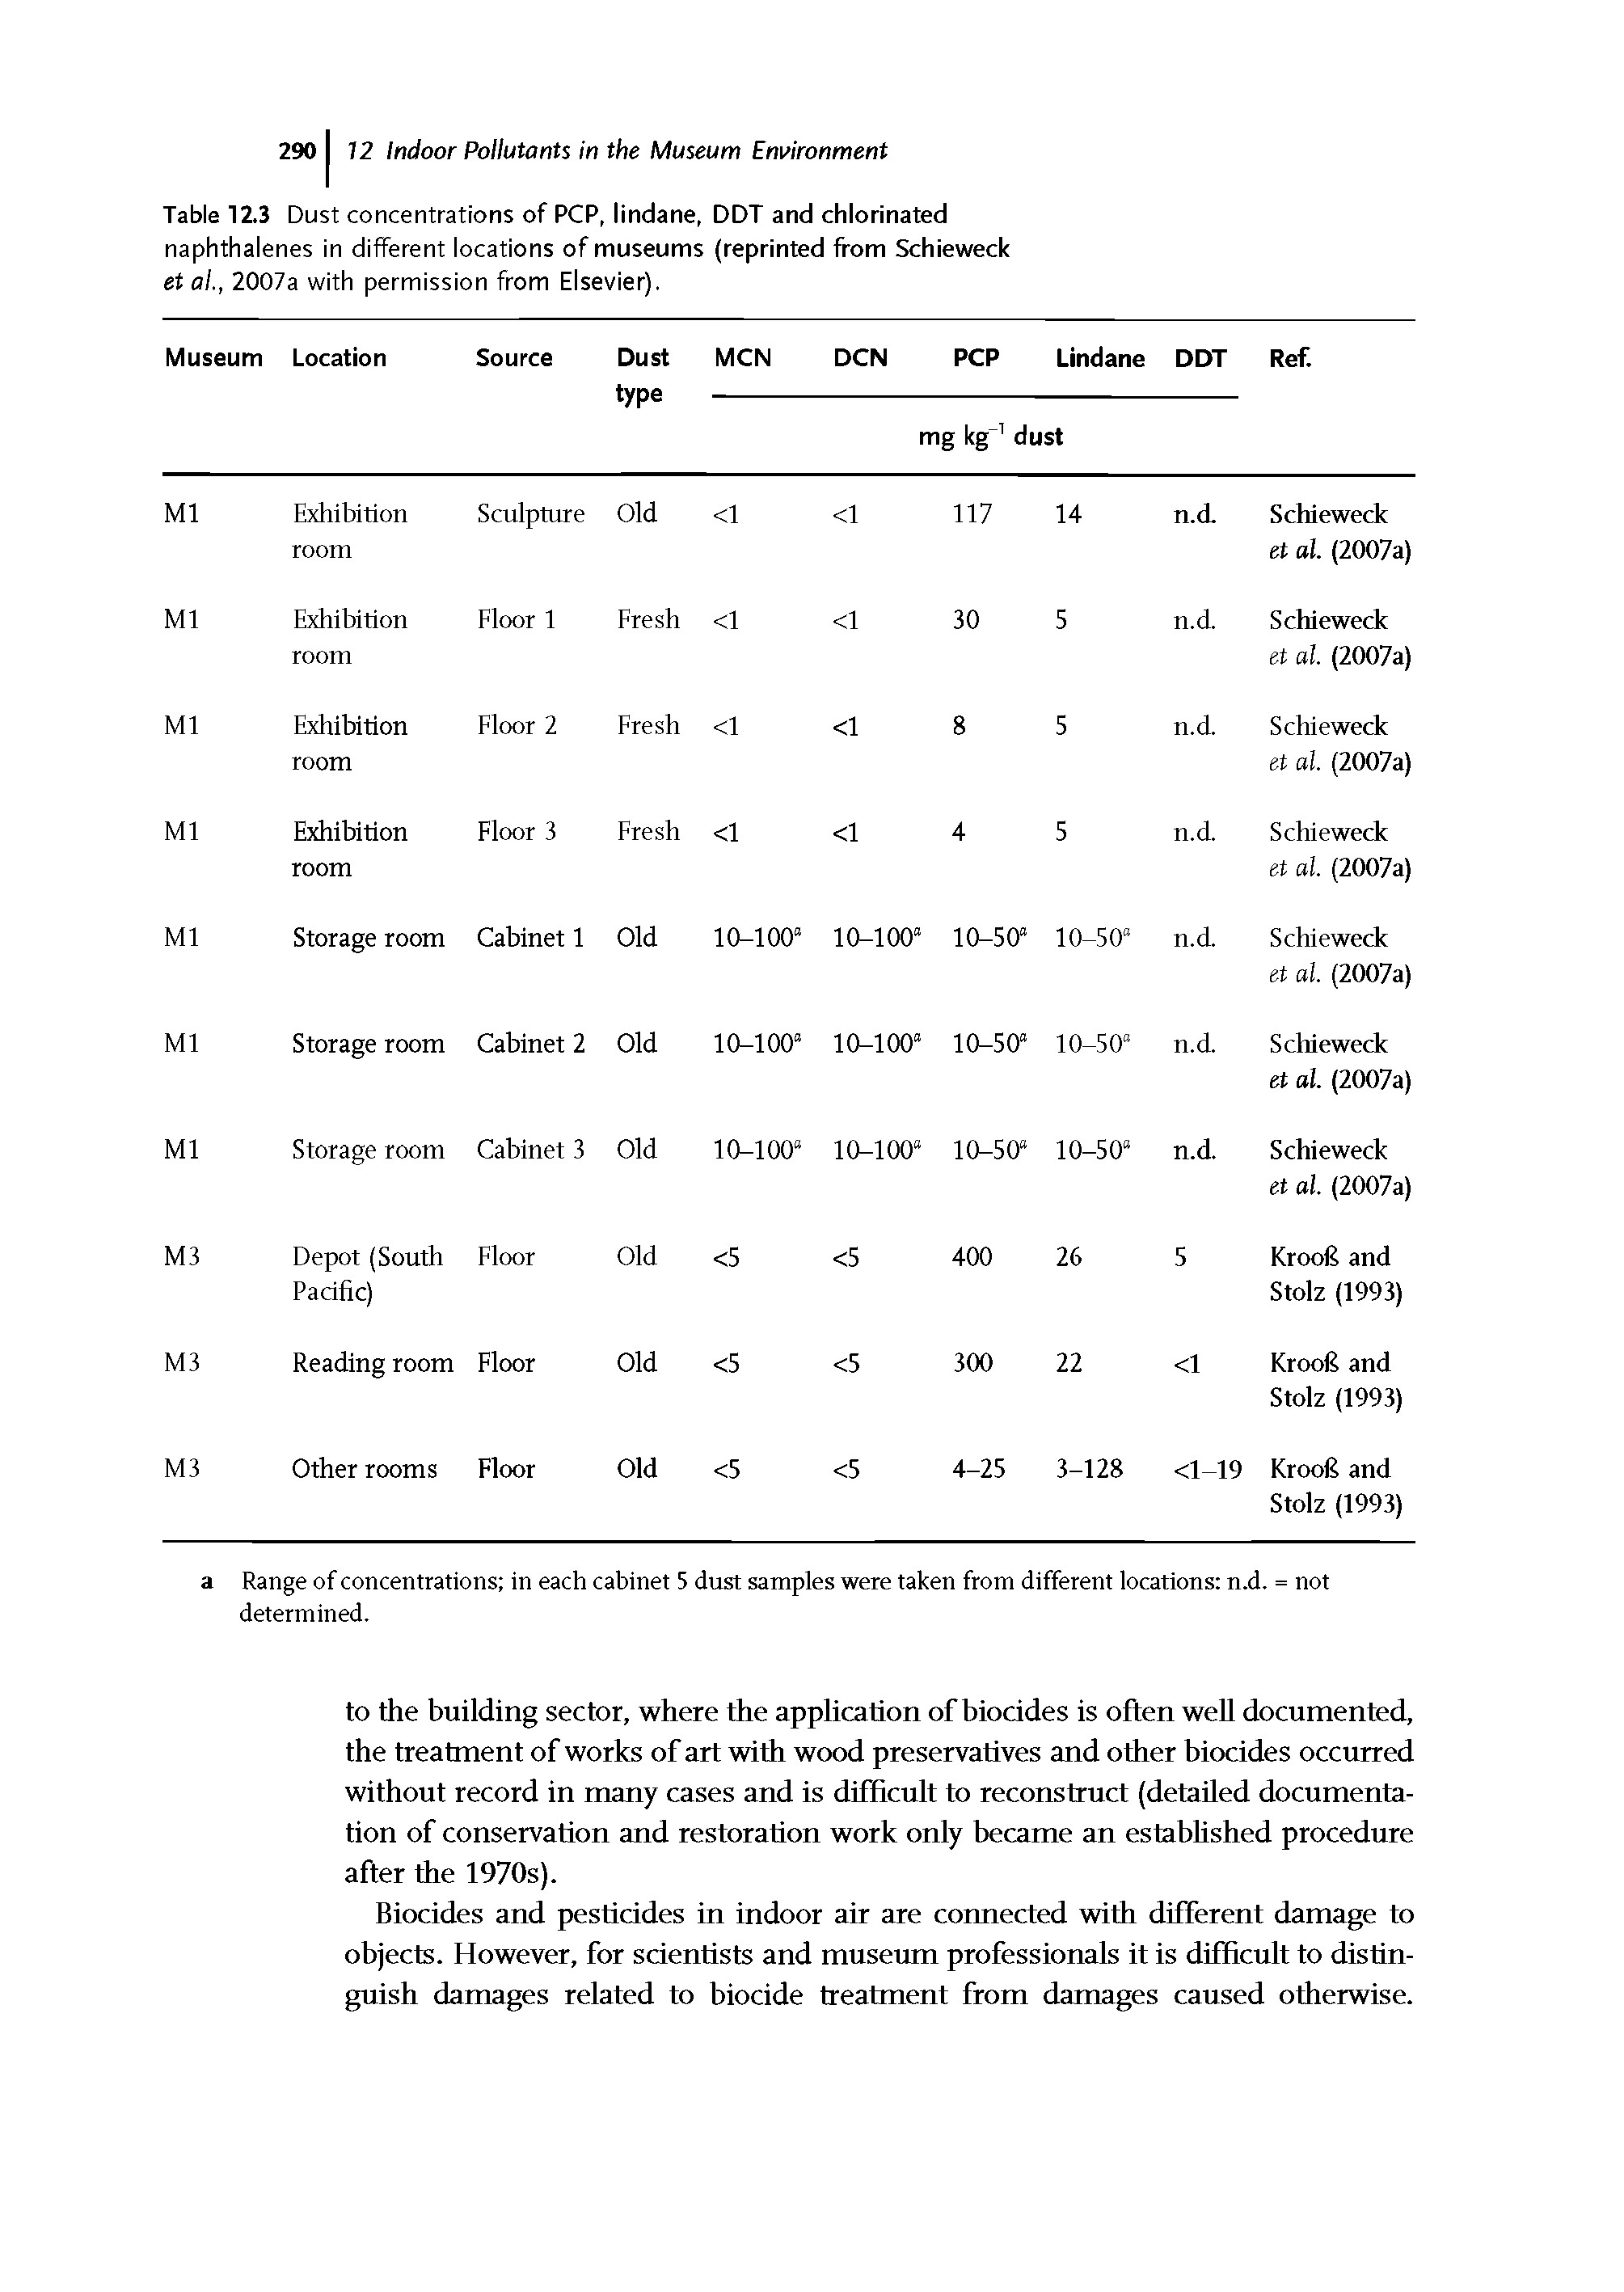 Table 12.3 Dust concentrations of PCP, lindane, DDT and chlorinated naphthalenes in different locations of museums (reprinted from Schieweck et a ., 2007a with permission from Elsevier).